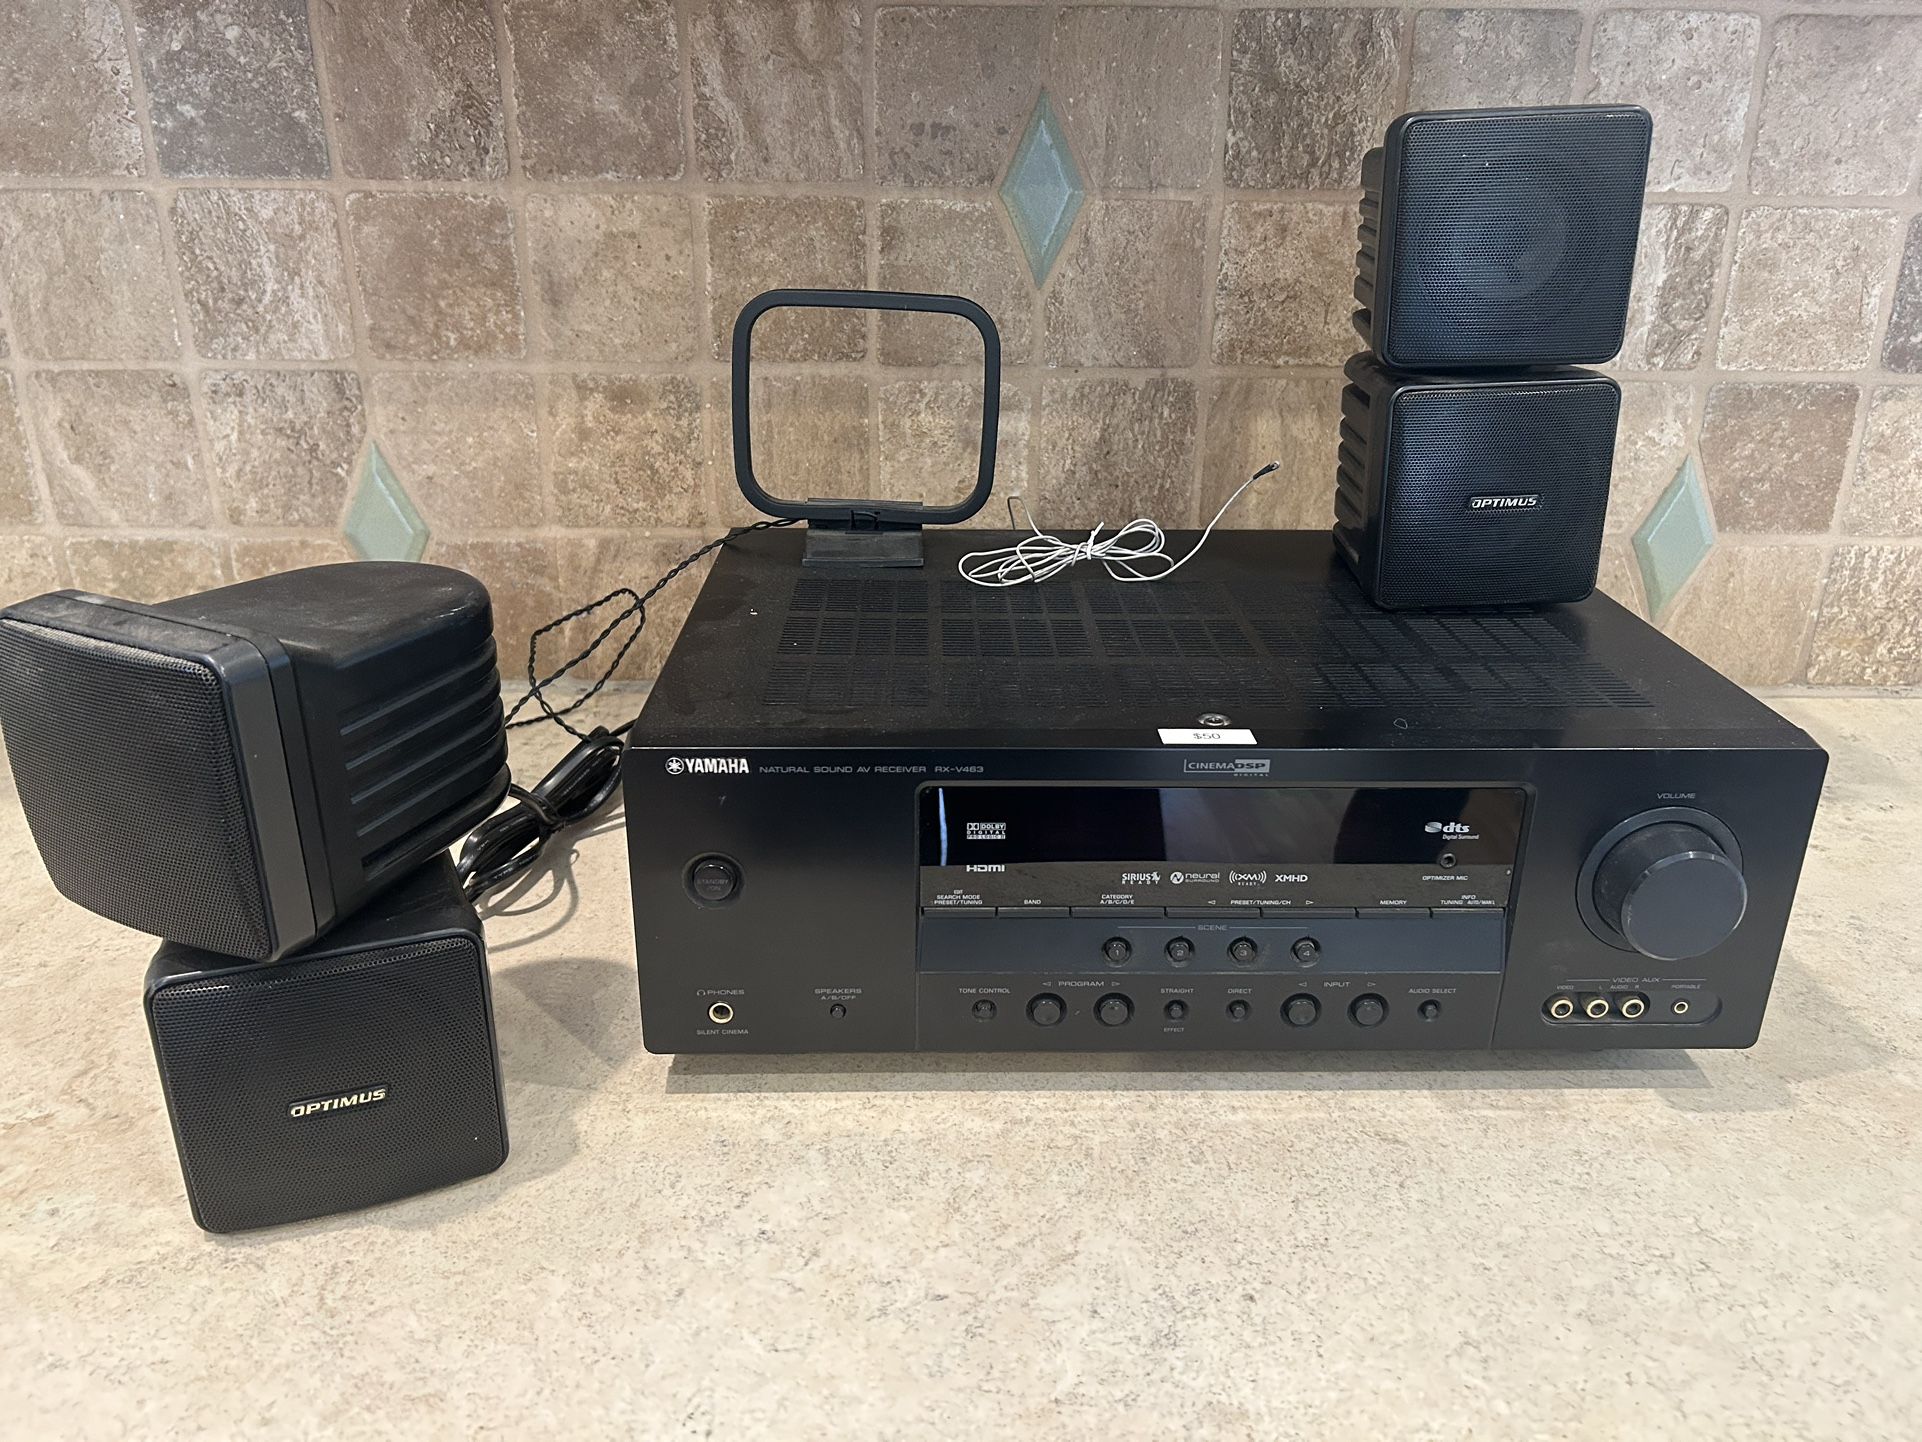 Yamaha Home Theatre Stereo Receiver